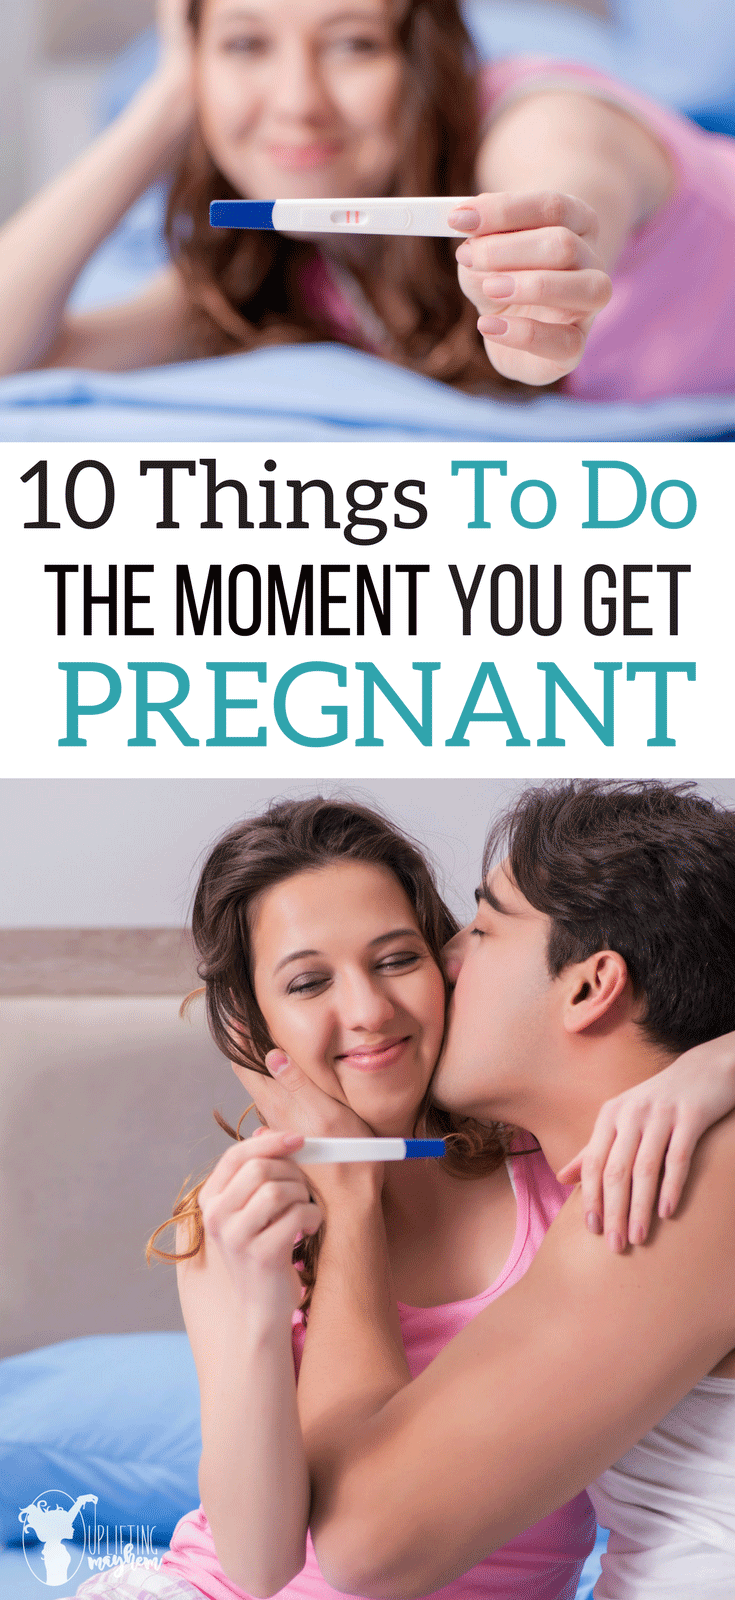 Your pregnant! Now what? Here are different tips to do the moment you get pregnant to help plan for the rest of your pregnancy and when you have this baby! 